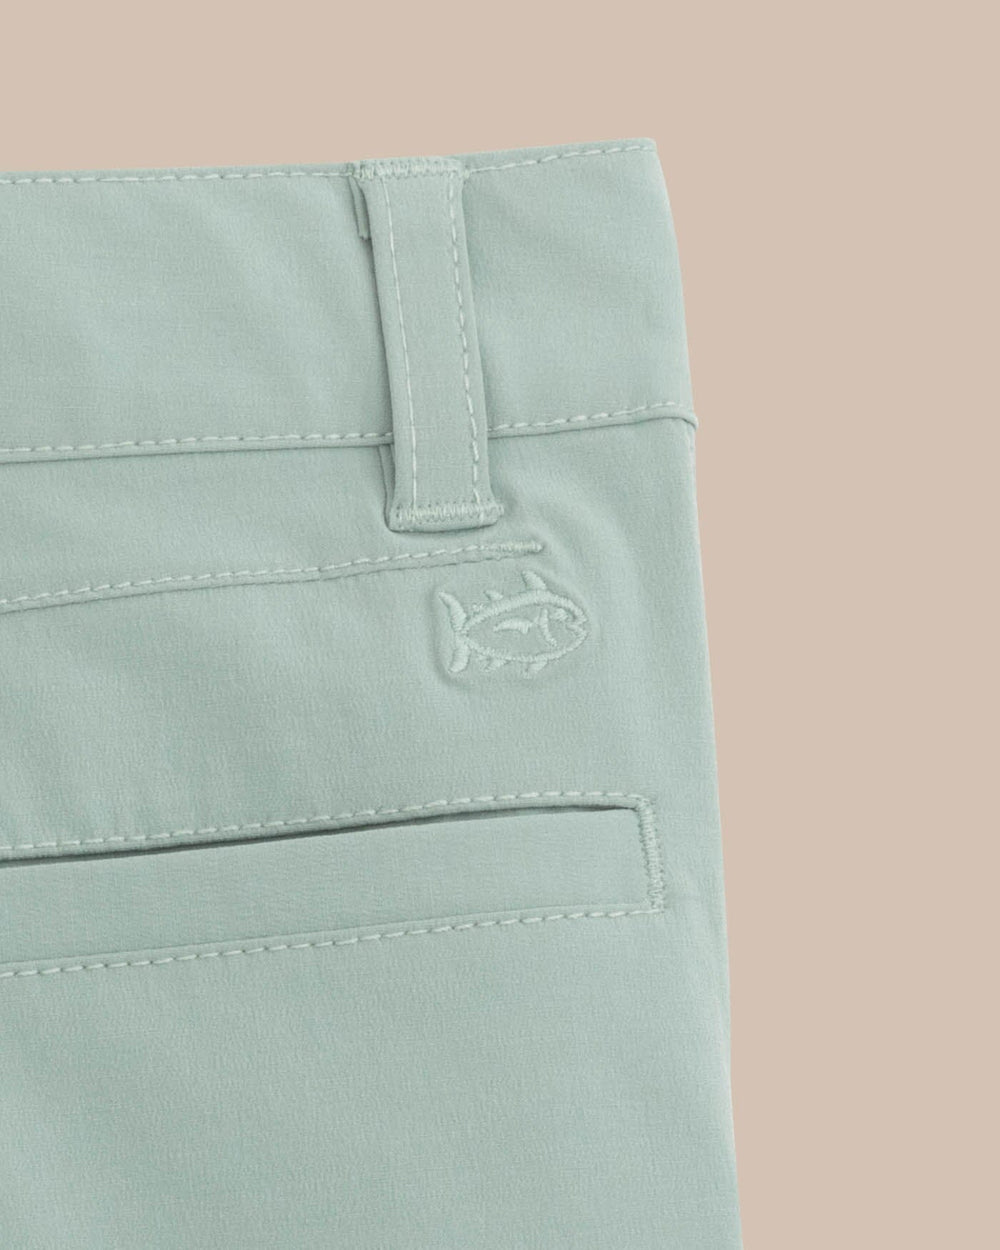 The detail view of the Southern Tide Boys T3 Gulf Short by Southern Tide - Green Surf